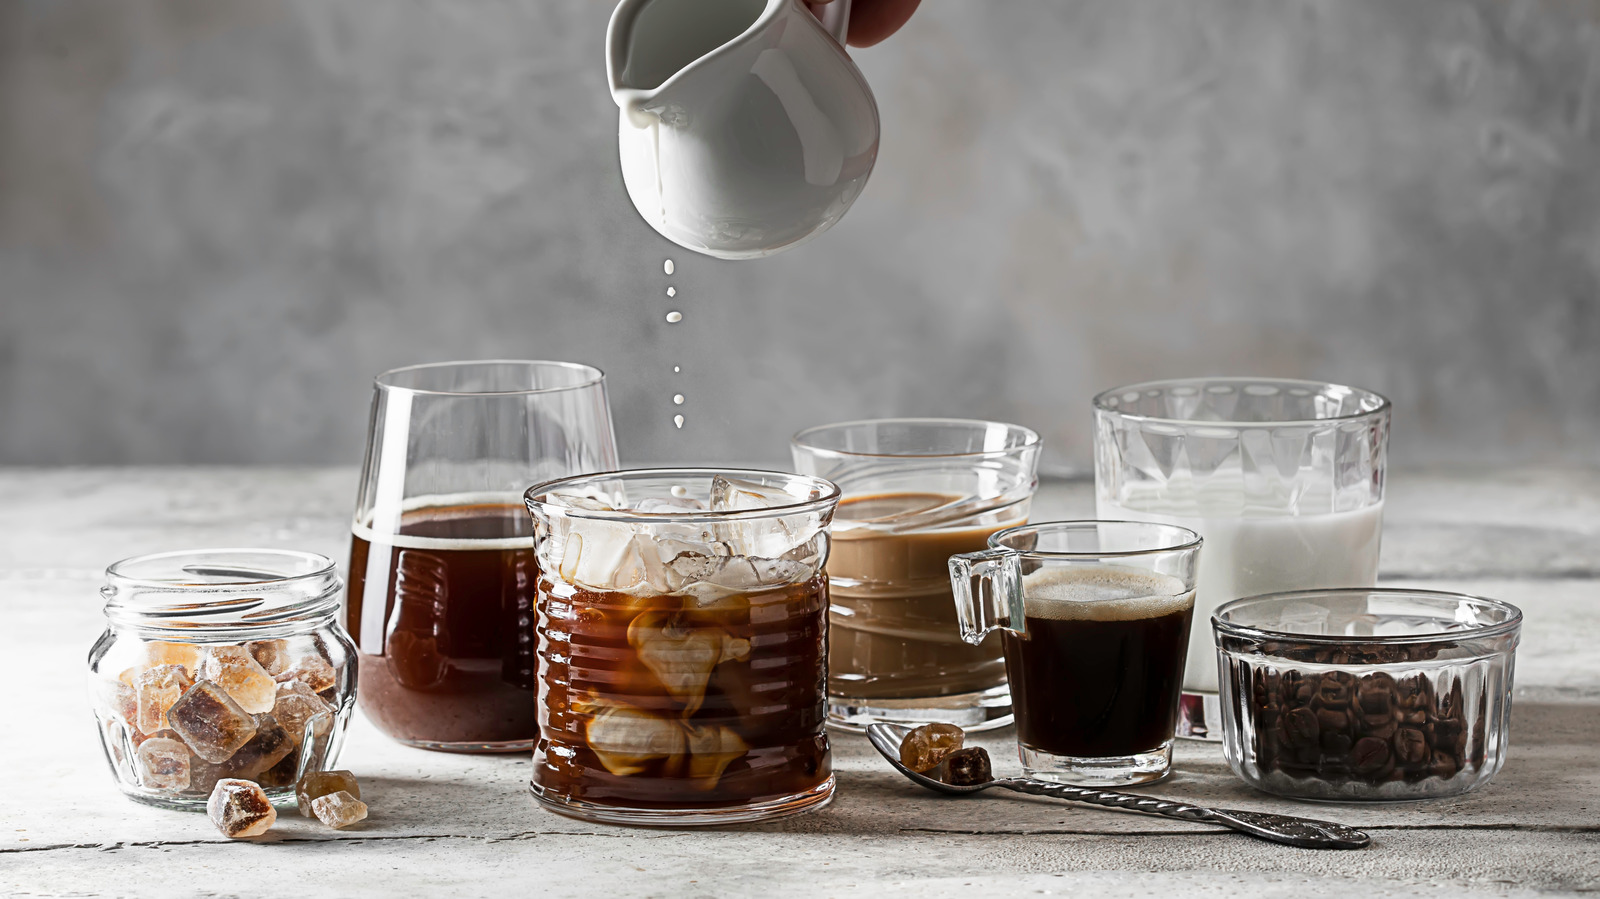 https://www.tastingtable.com/img/gallery/13-tips-to-add-more-flavor-to-your-iced-coffee/l-intro-1676560881.jpg